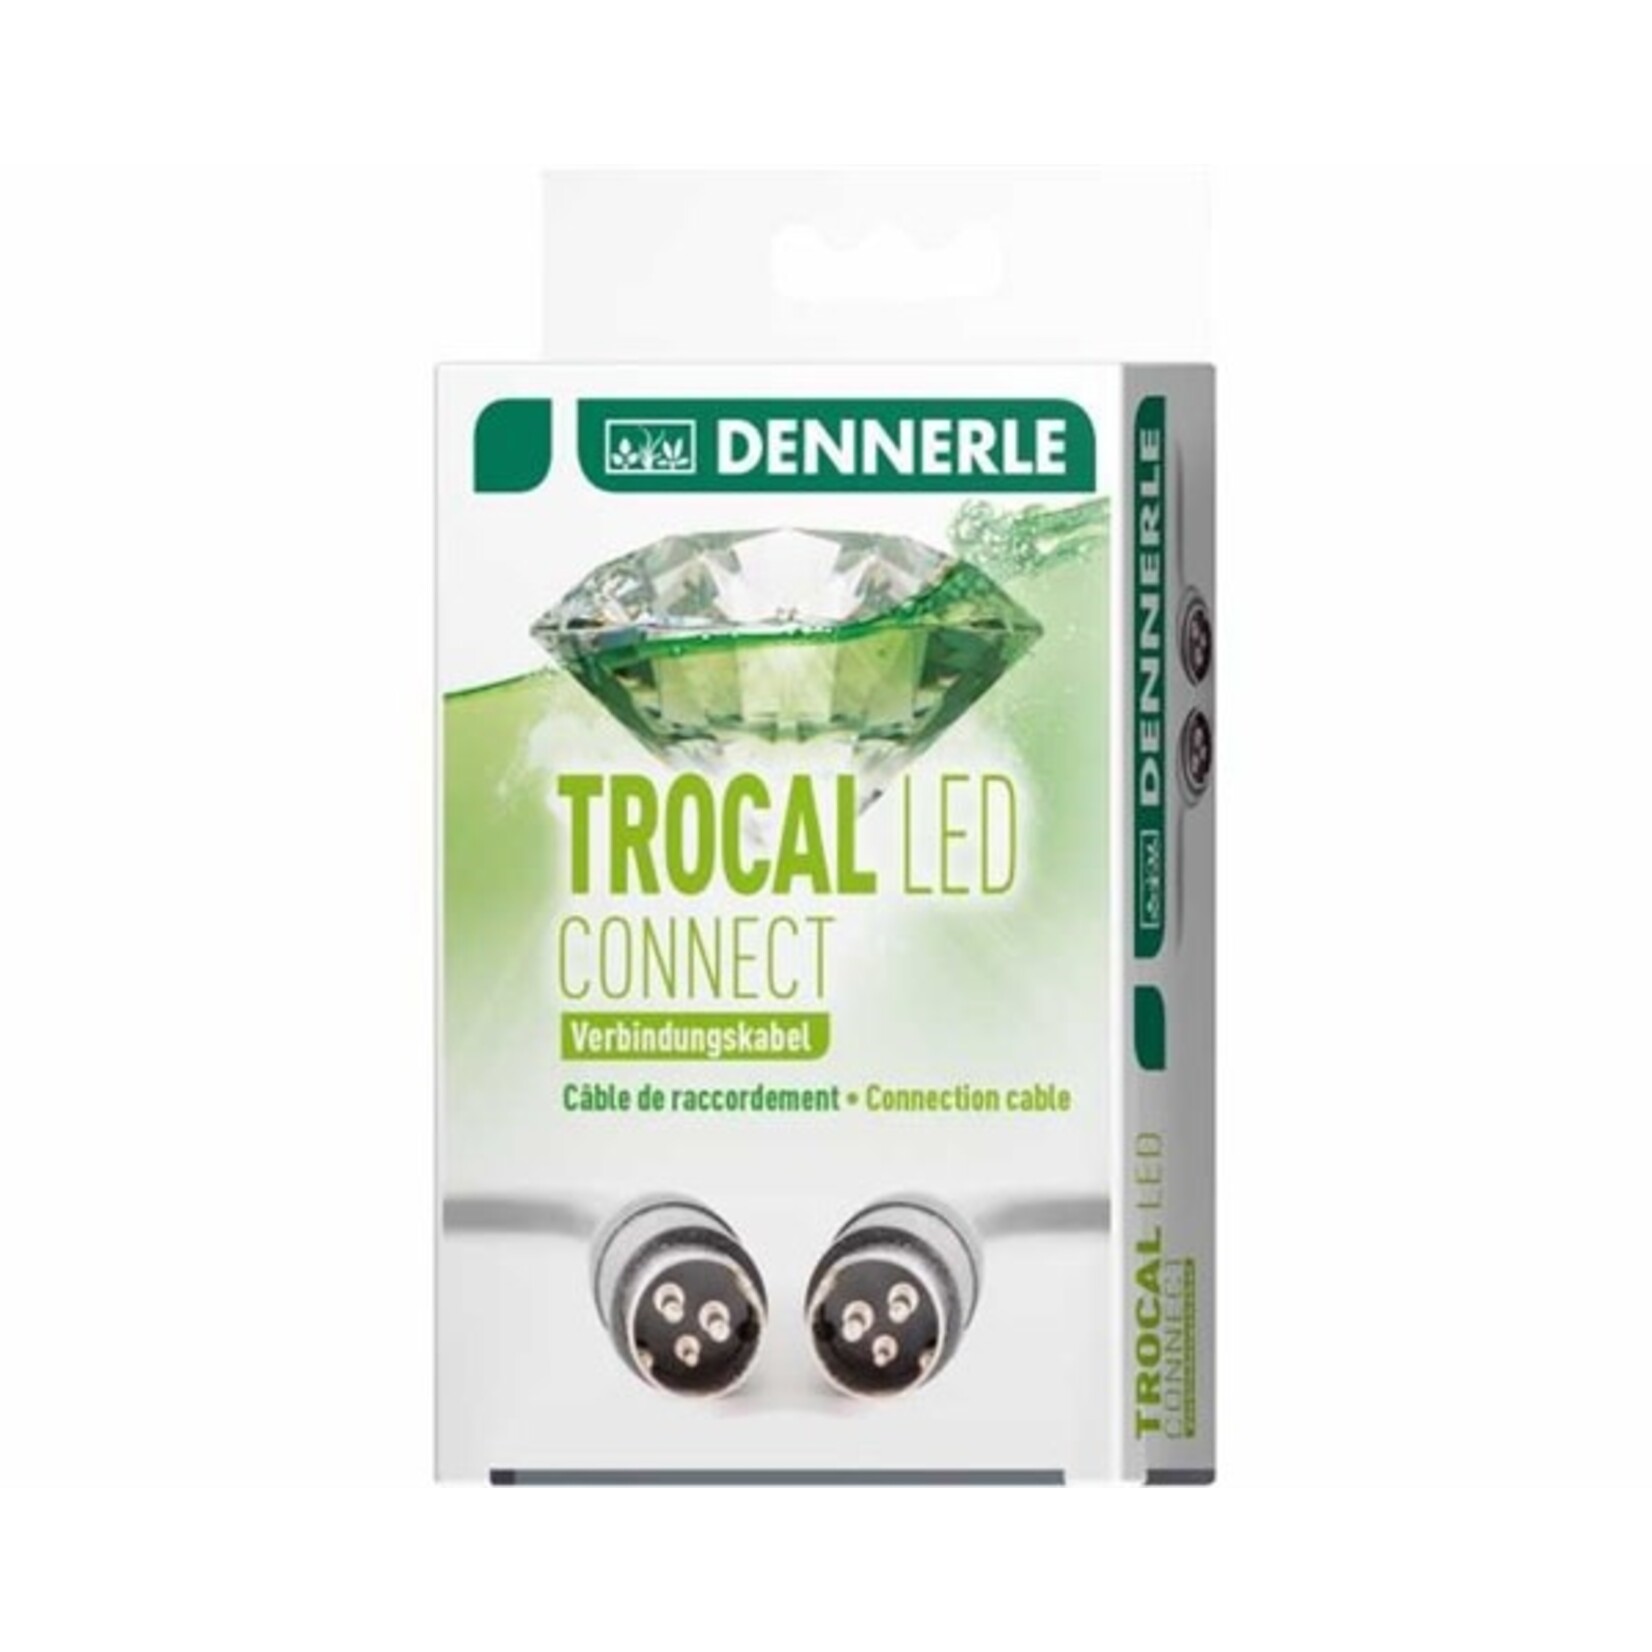 Dennerle trocal LED connect